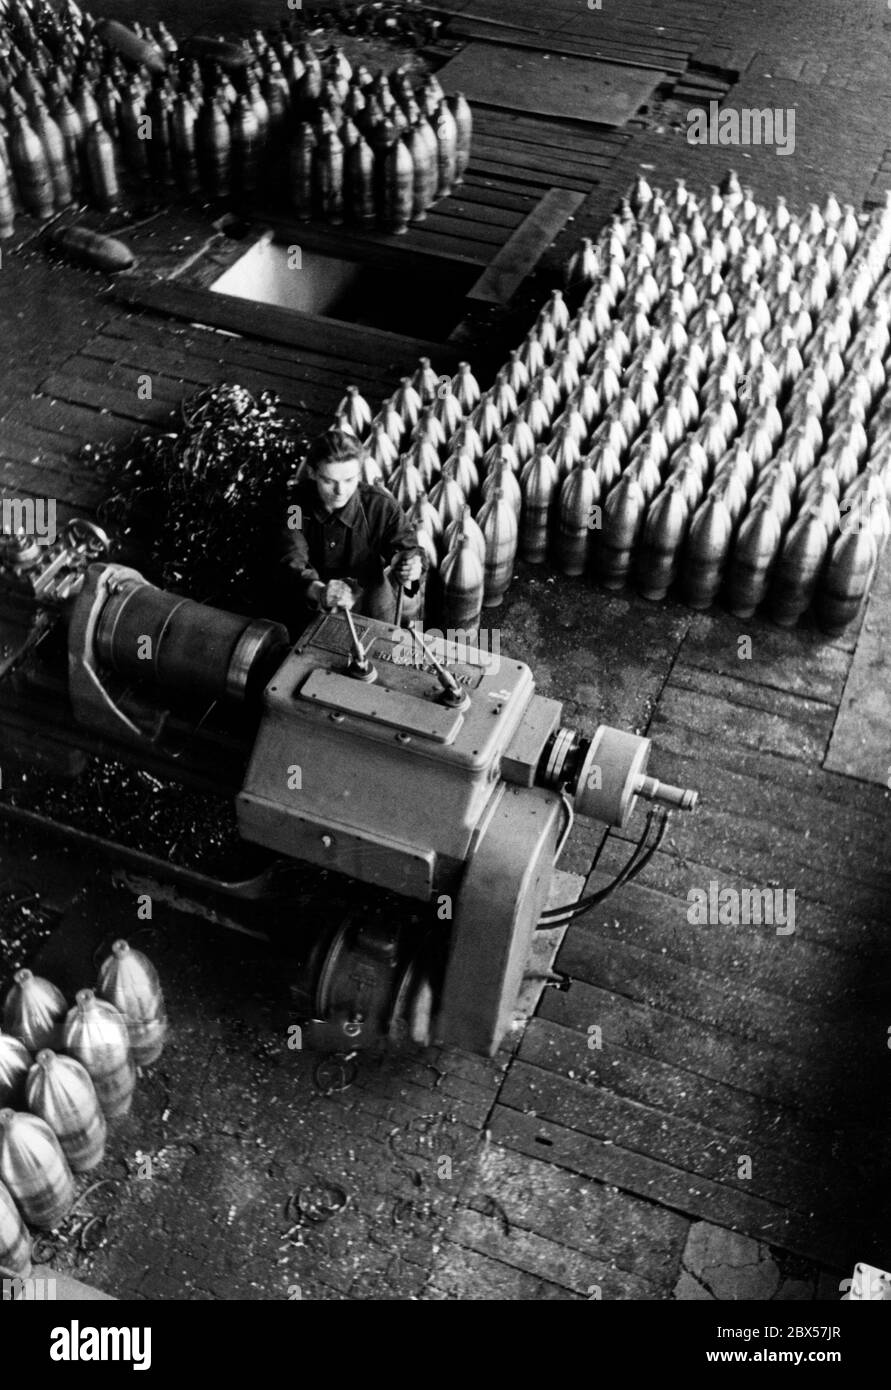 An armament factory manufactures ammunition, grenades and bombs for the war. Stock Photo